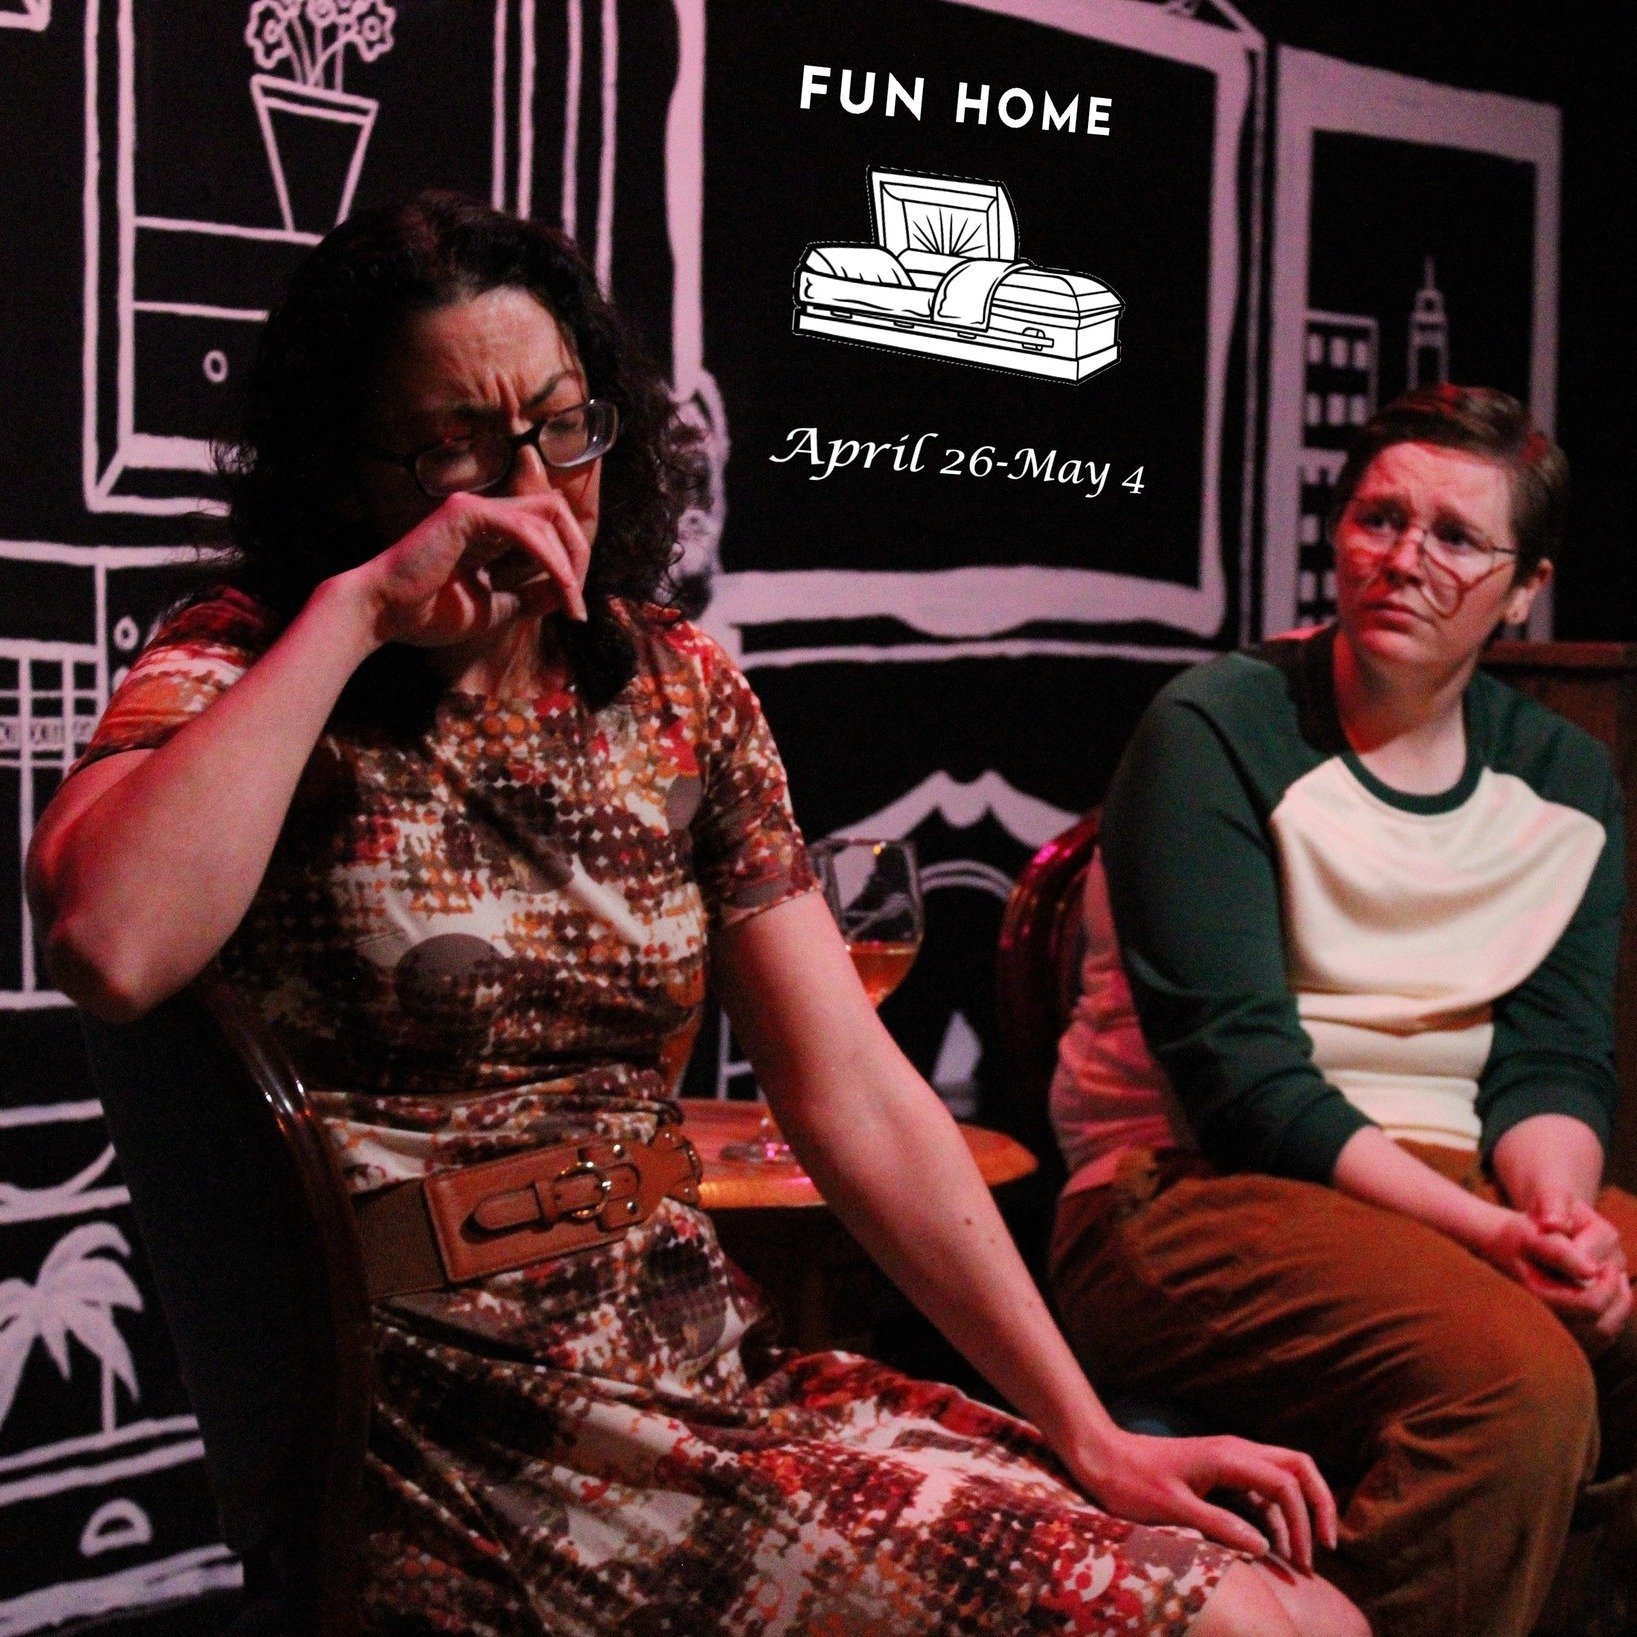 &ldquo;I cannot overstate what a compelling piece Fun Home is&hellip;I think in some respect I preferred this smaller rendition than the grandness of a commercial entity&hellip;truly one you don&rsquo;t want to miss.&ldquo;
&ldquo;What could have bee